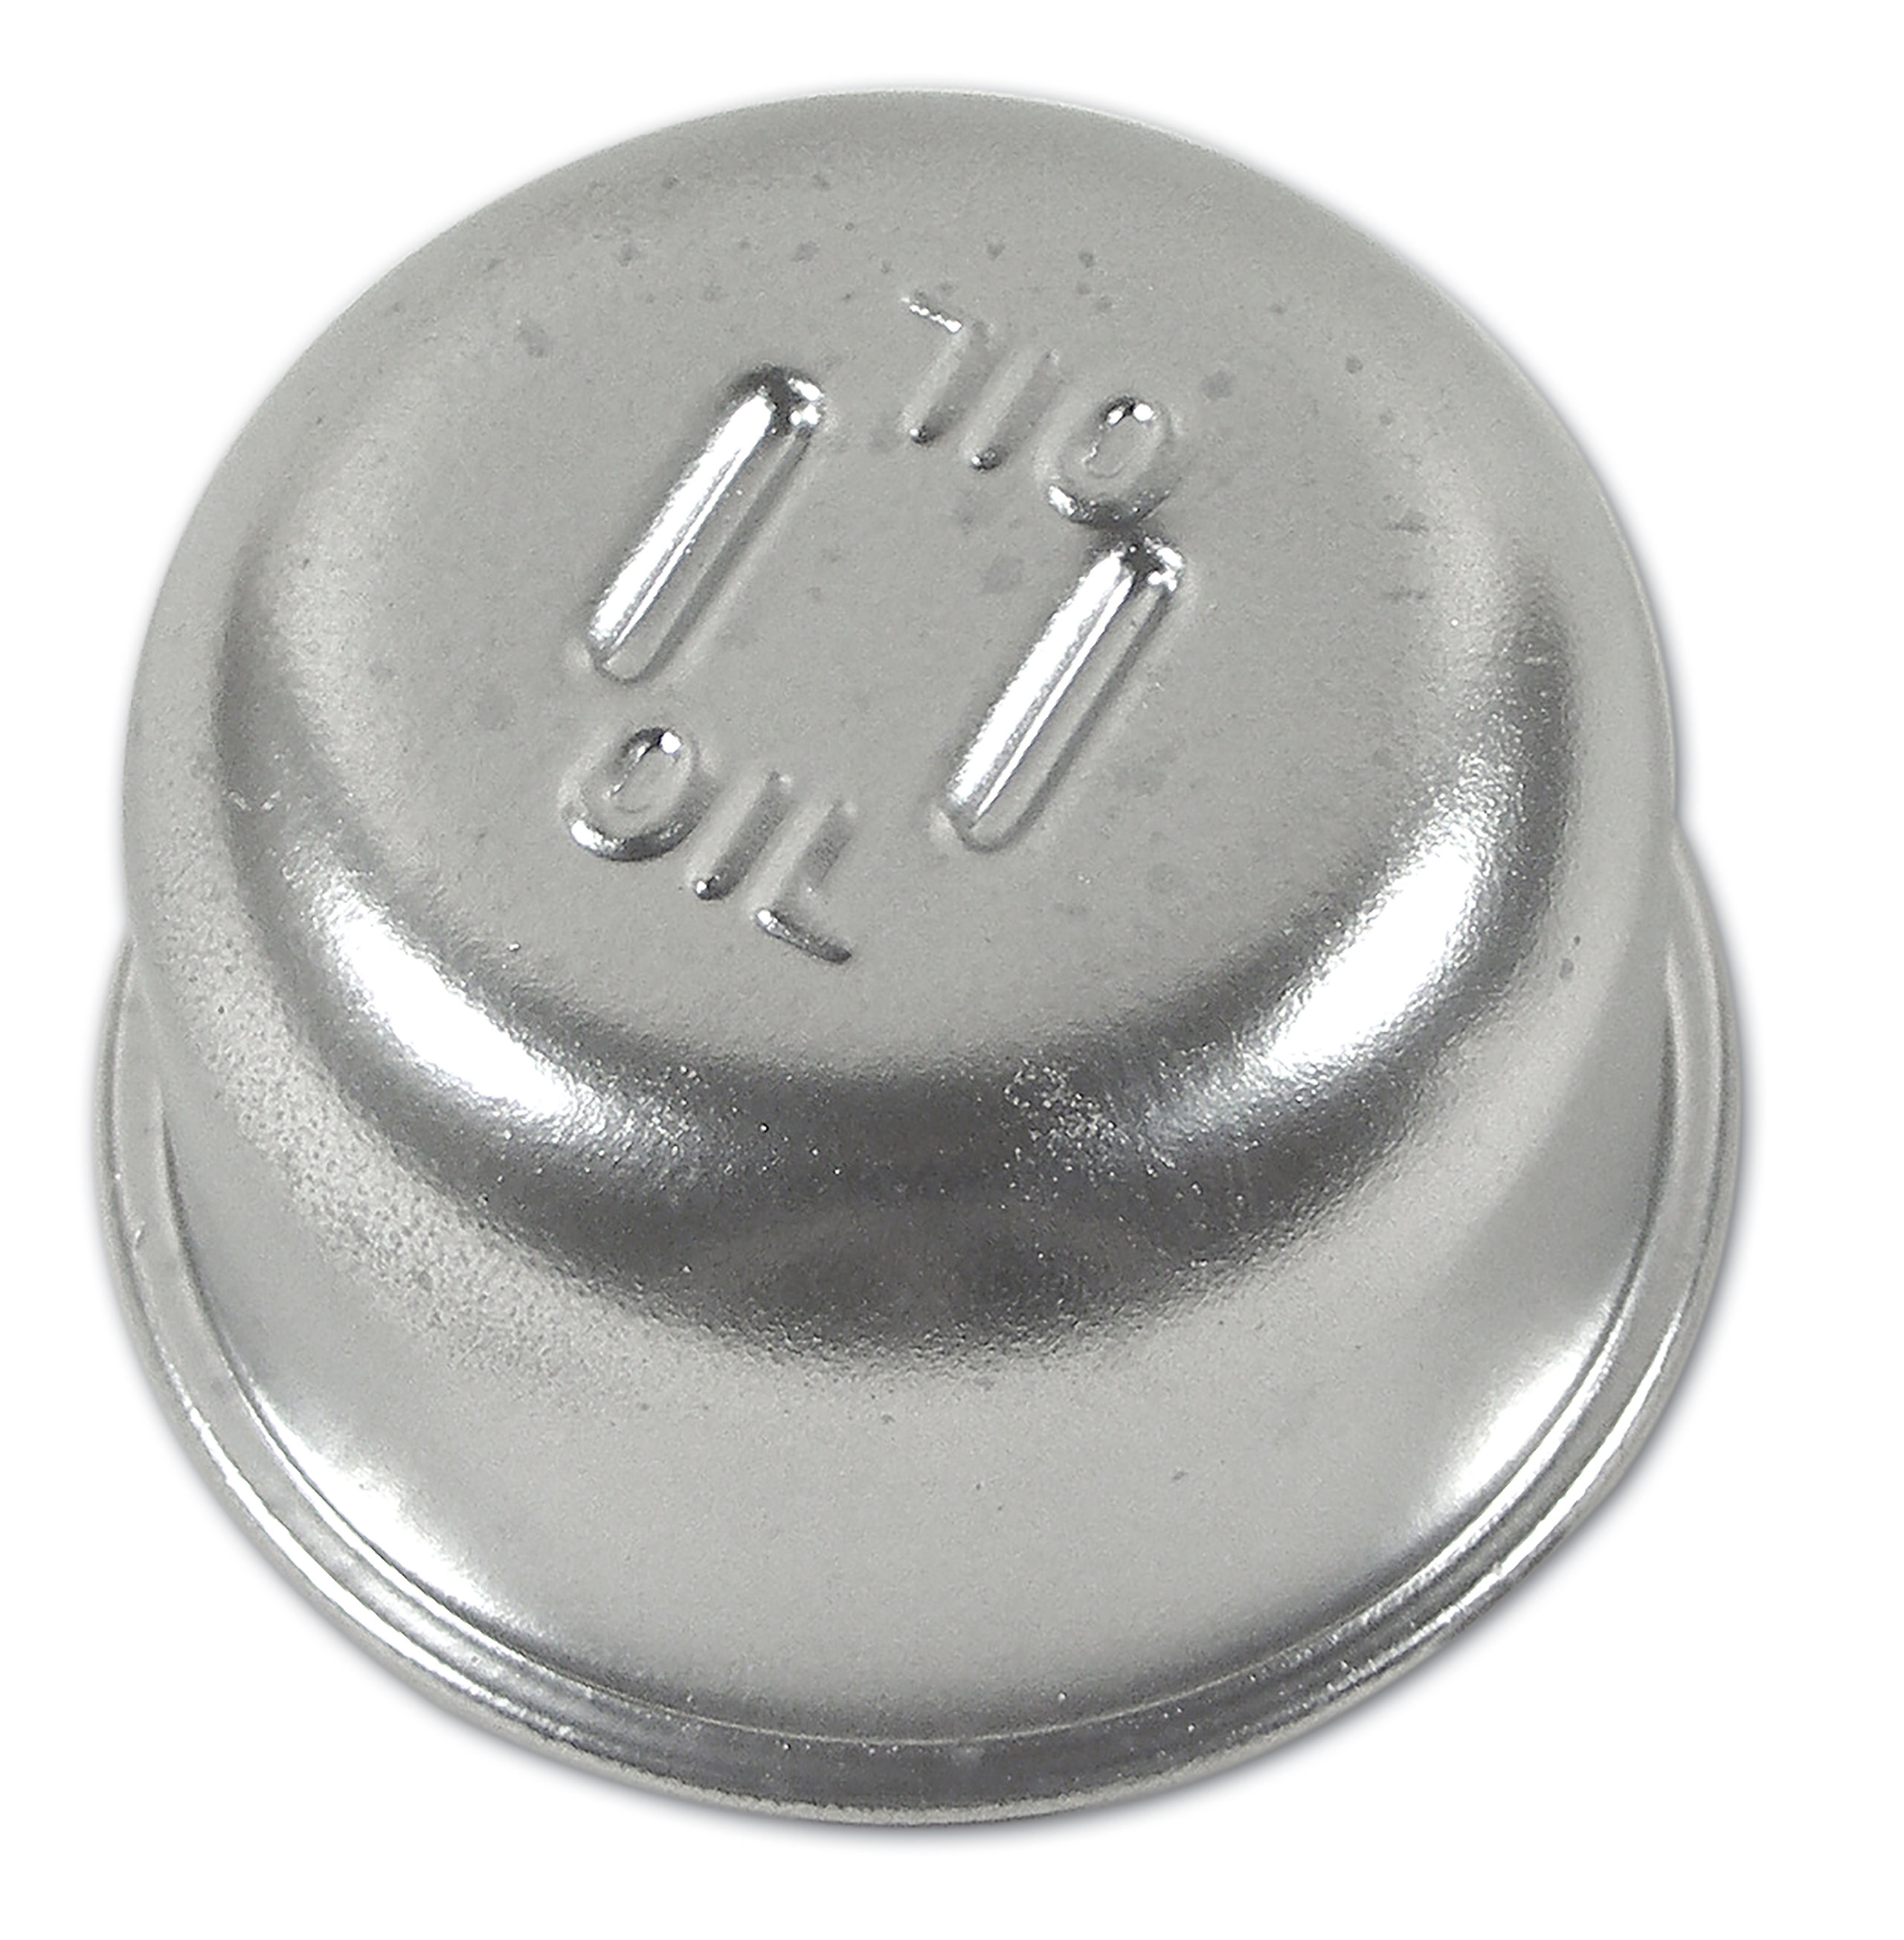 C1 1957-1958 Chevrolet Corvette Oil Cap. Unvented W/Solid Lifters & High Performance - CA